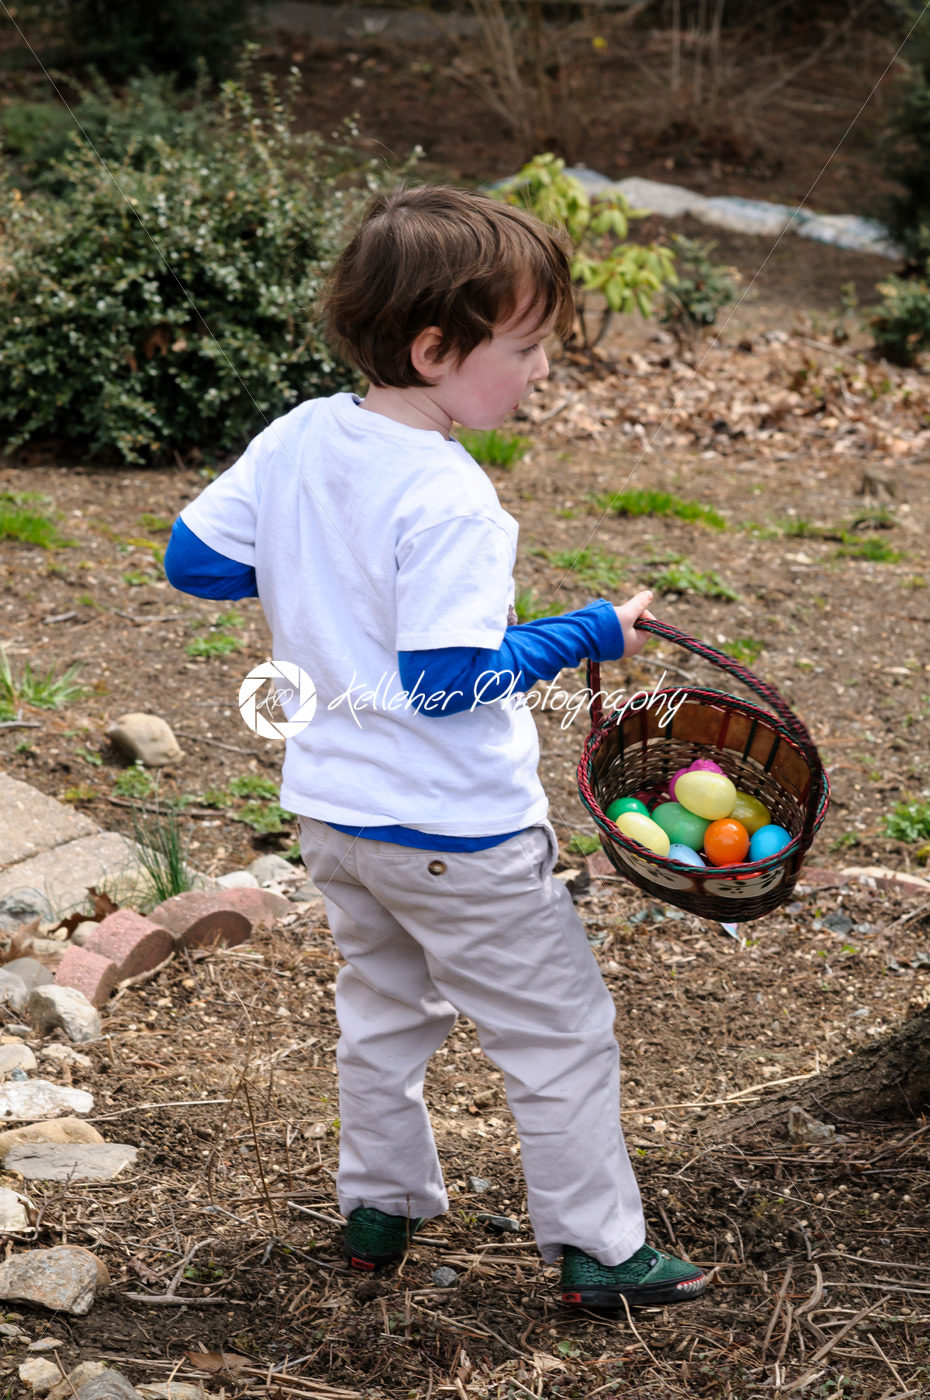 Young Boy Outside Dressed Up for Easter holding Basket - Kelleher Photography Store